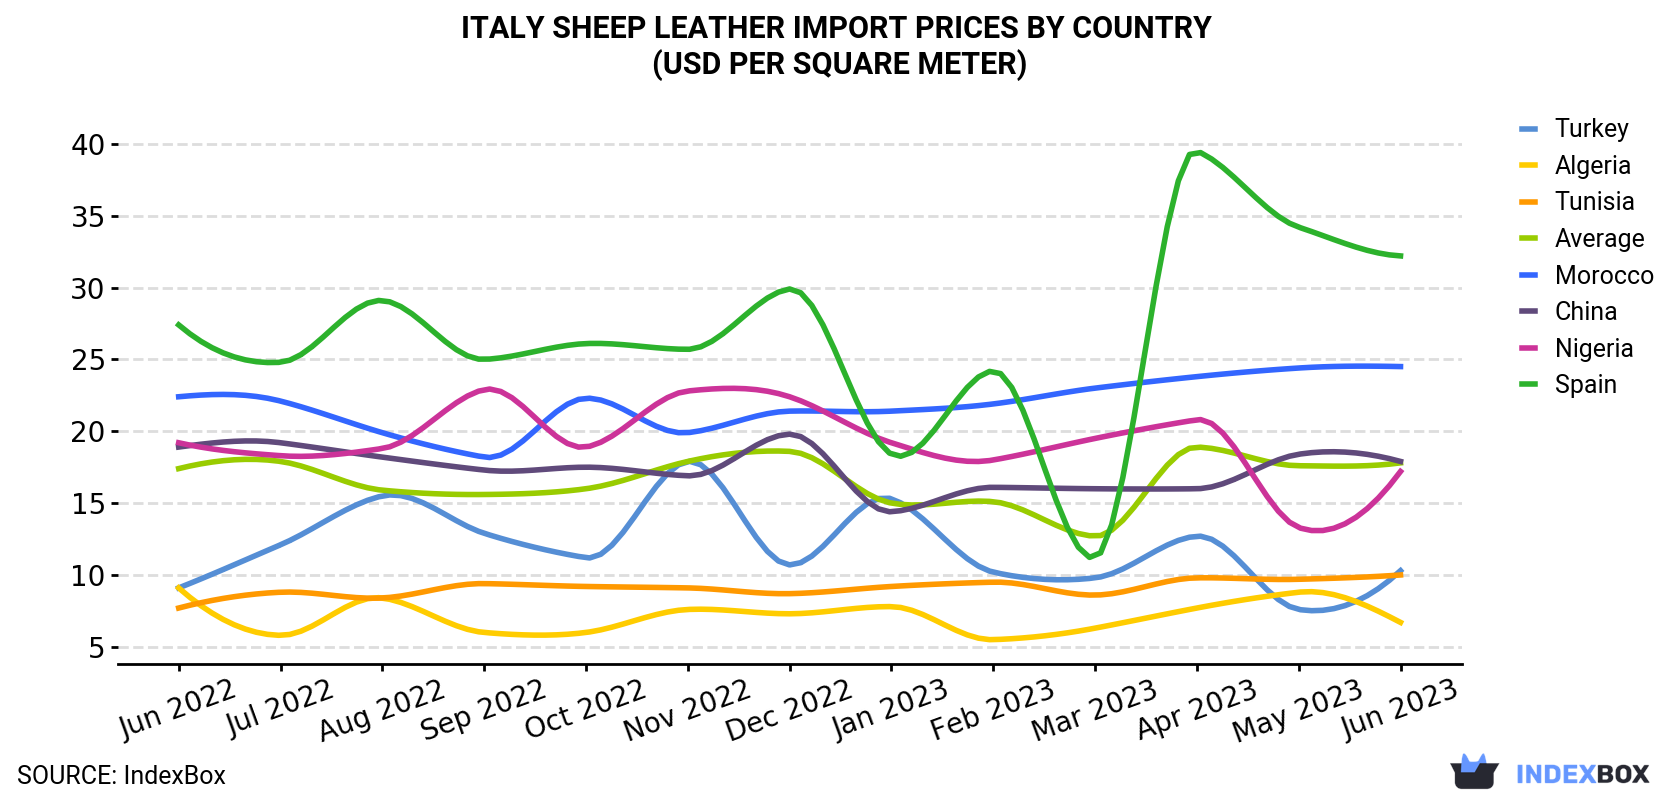 Italy Sheep Leather Import Prices By Country (USD Per Square Meter)